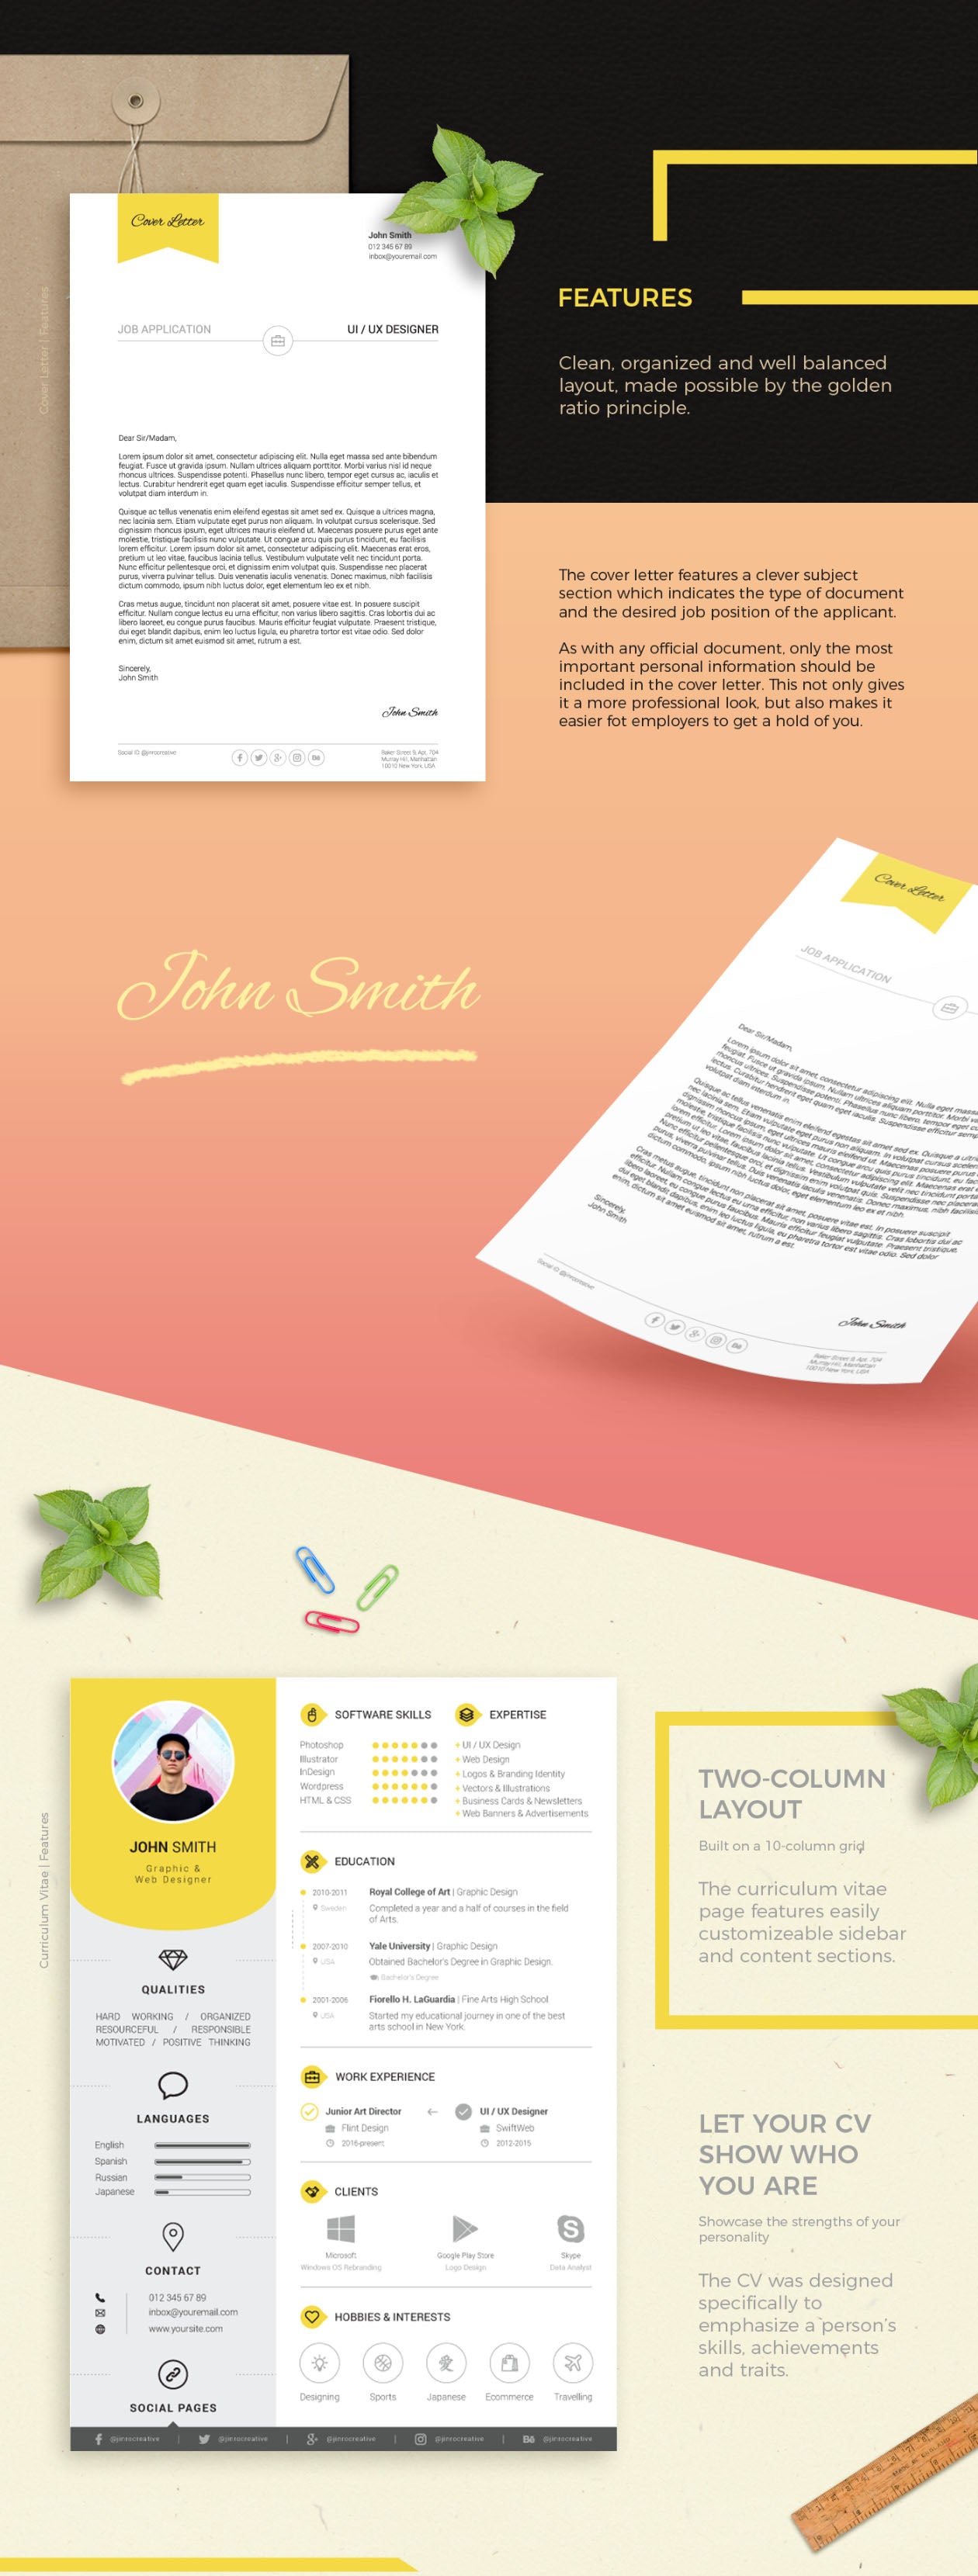 Free Resume and Cover Letter Print Templates in Illustrator (AI), Photoshop (PSD) and Indesign (INDD) Formats